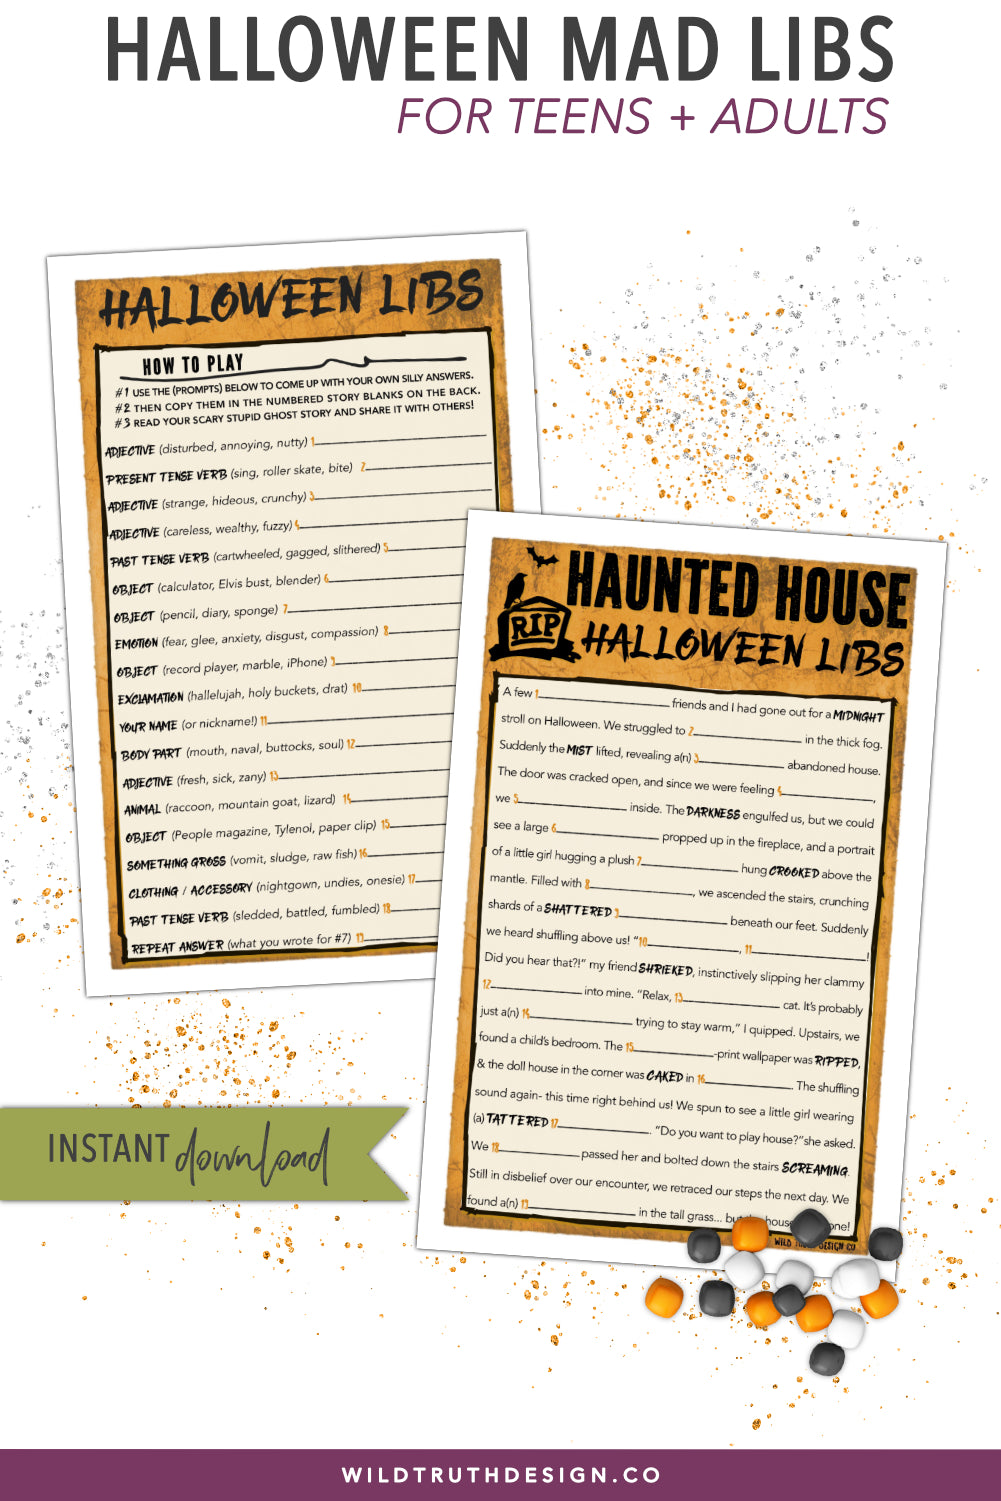 hilarious halloween games for adults - mad libs